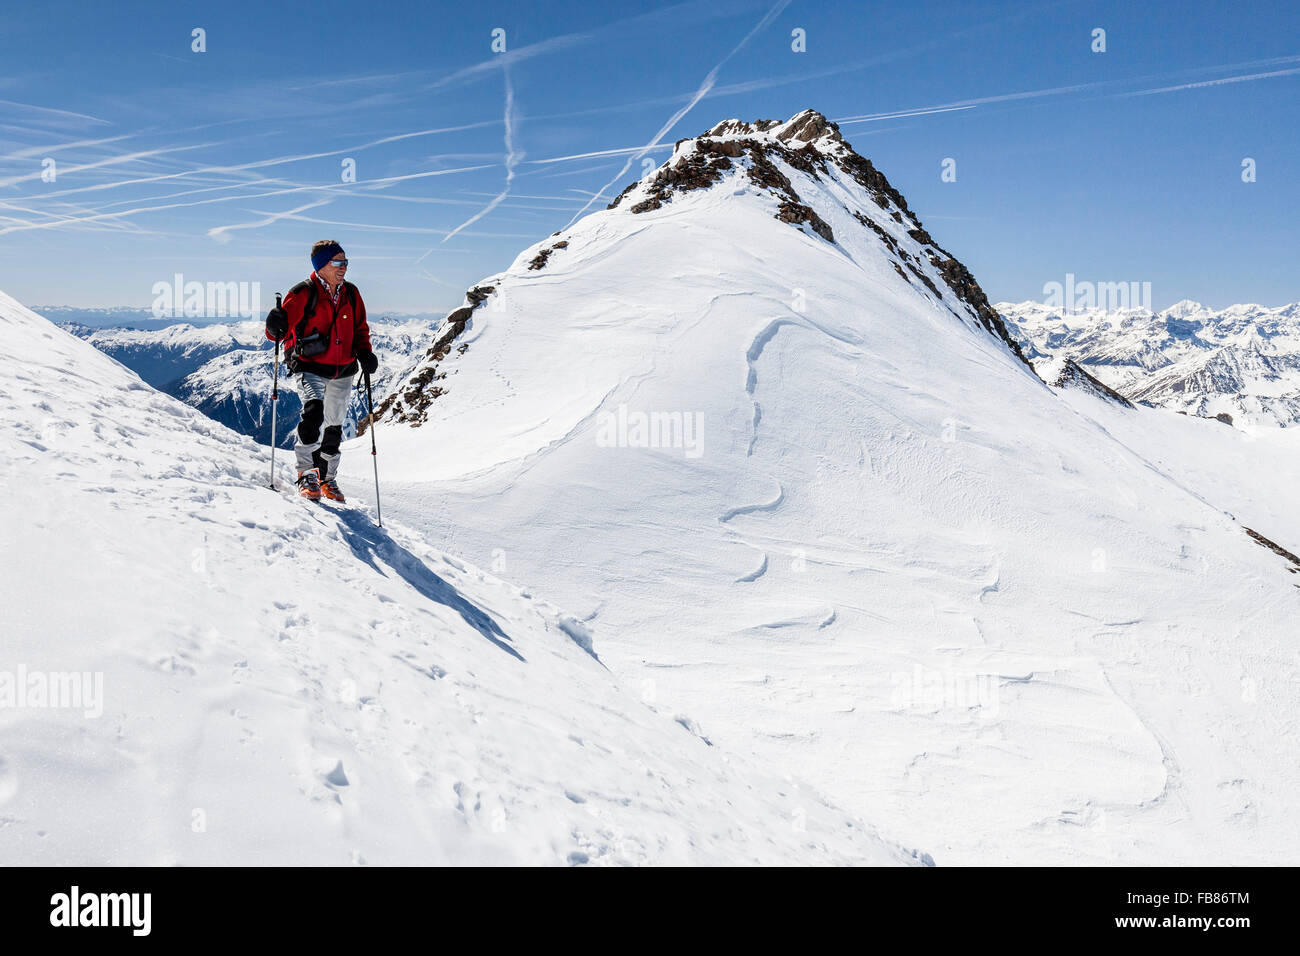 Ski tourer, ascent to the Finail summit, behind the Finailköpfe, Val Senales, Meraner Land, Alps, South Tyrol Province Stock Photo